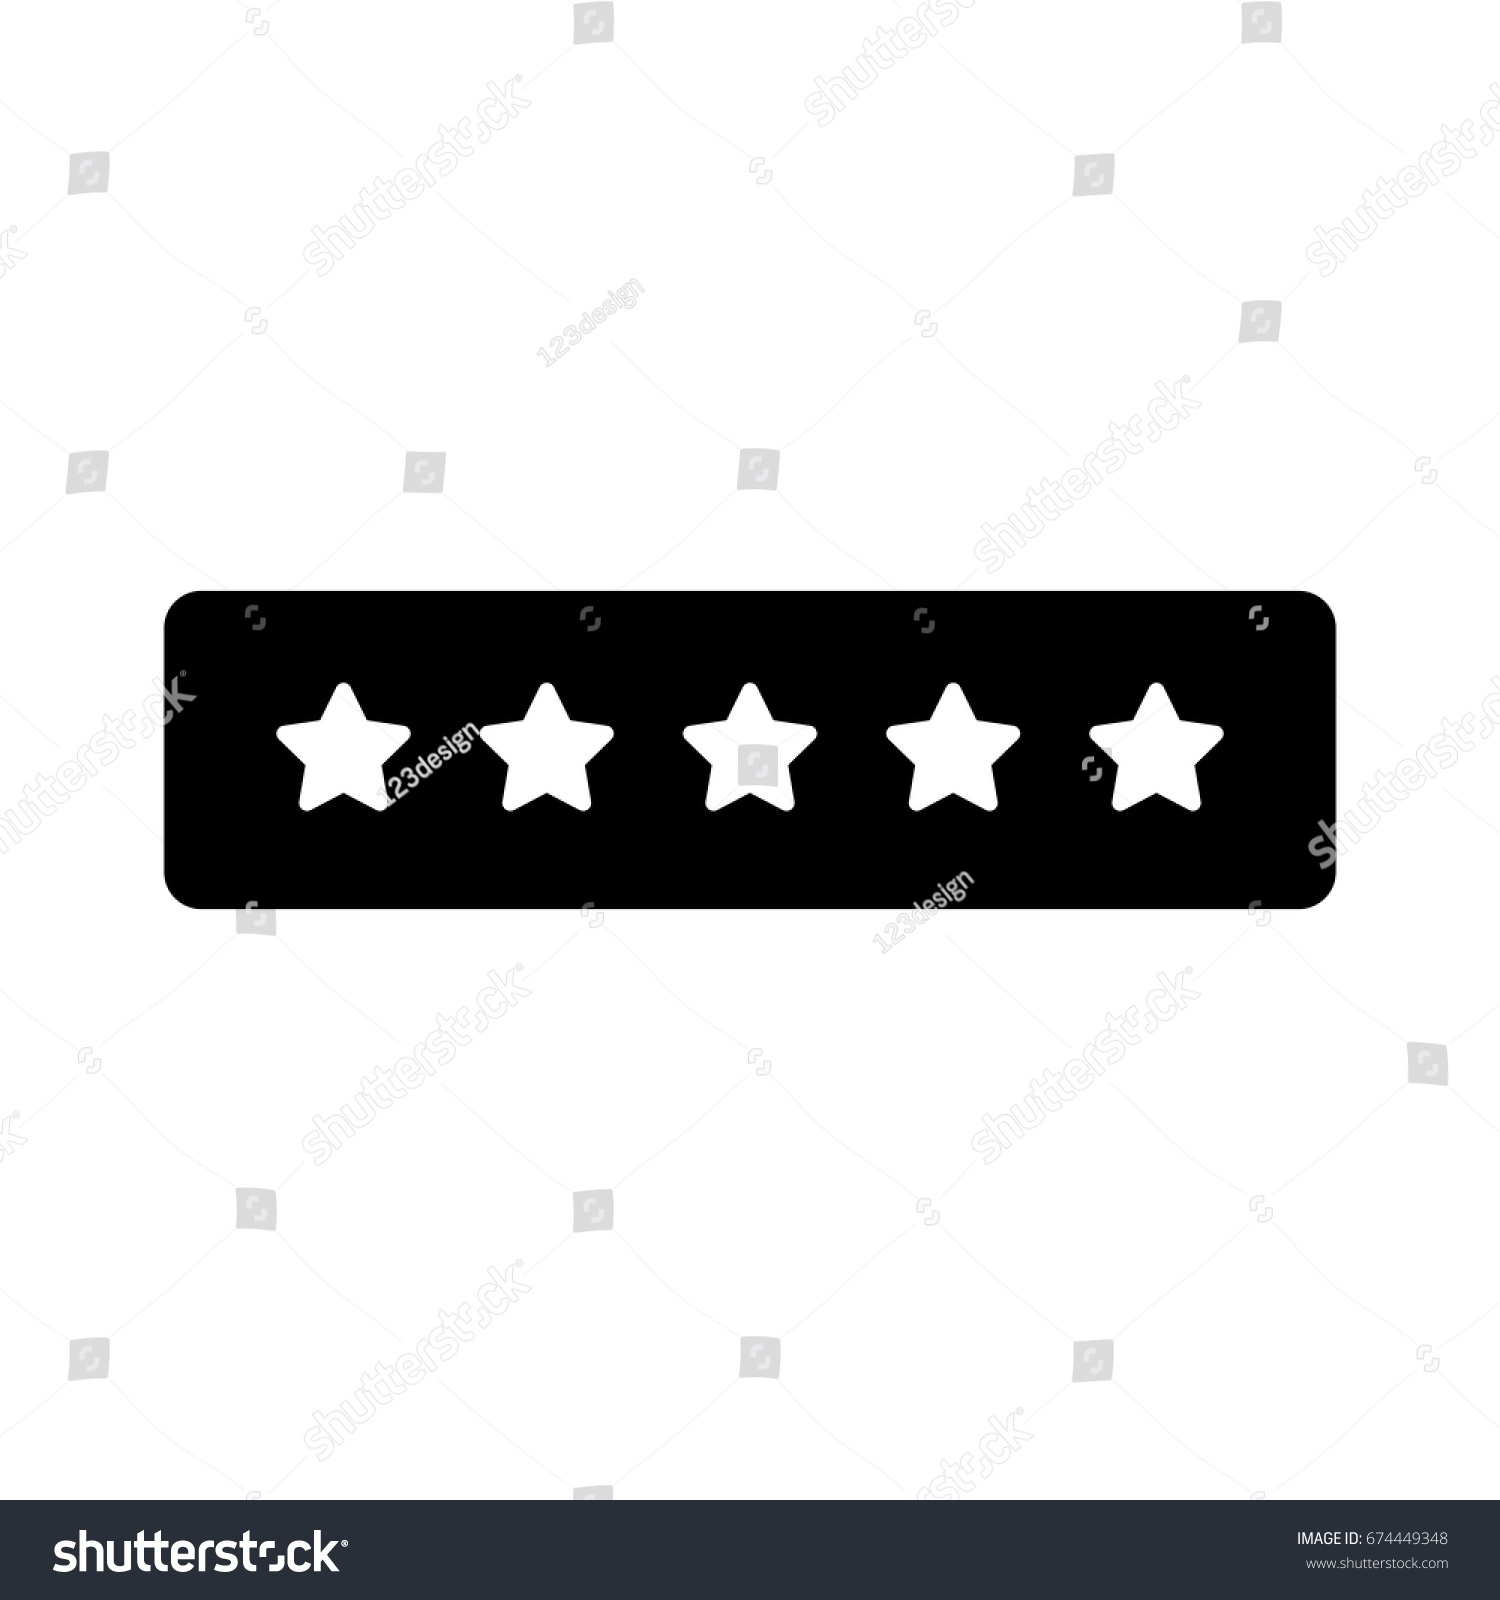 Award, half star, ratings, star icon | Icon search engine